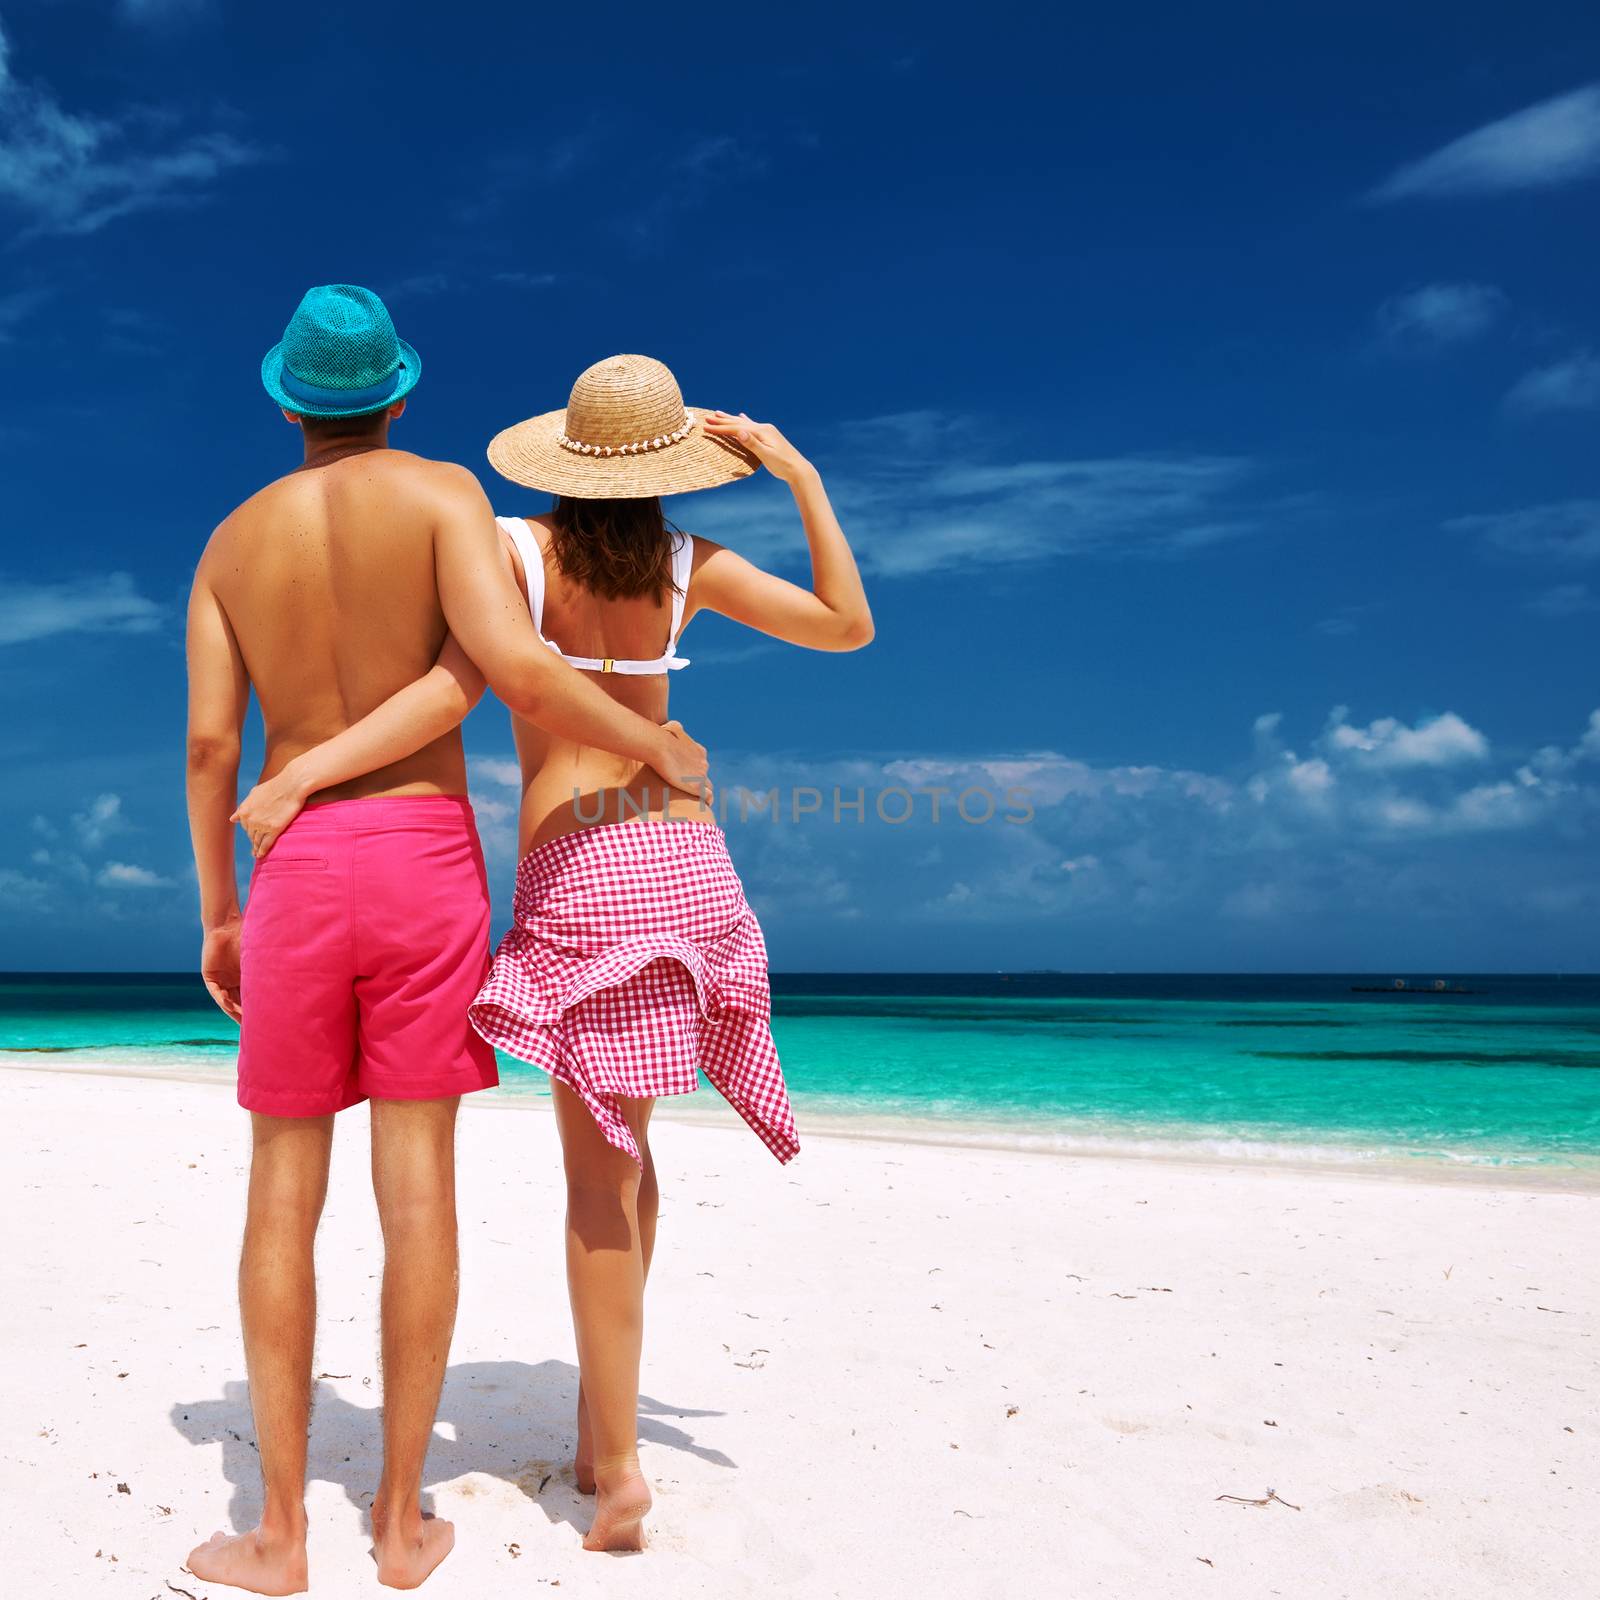 Couple in blue on a beach at Maldives by haveseen